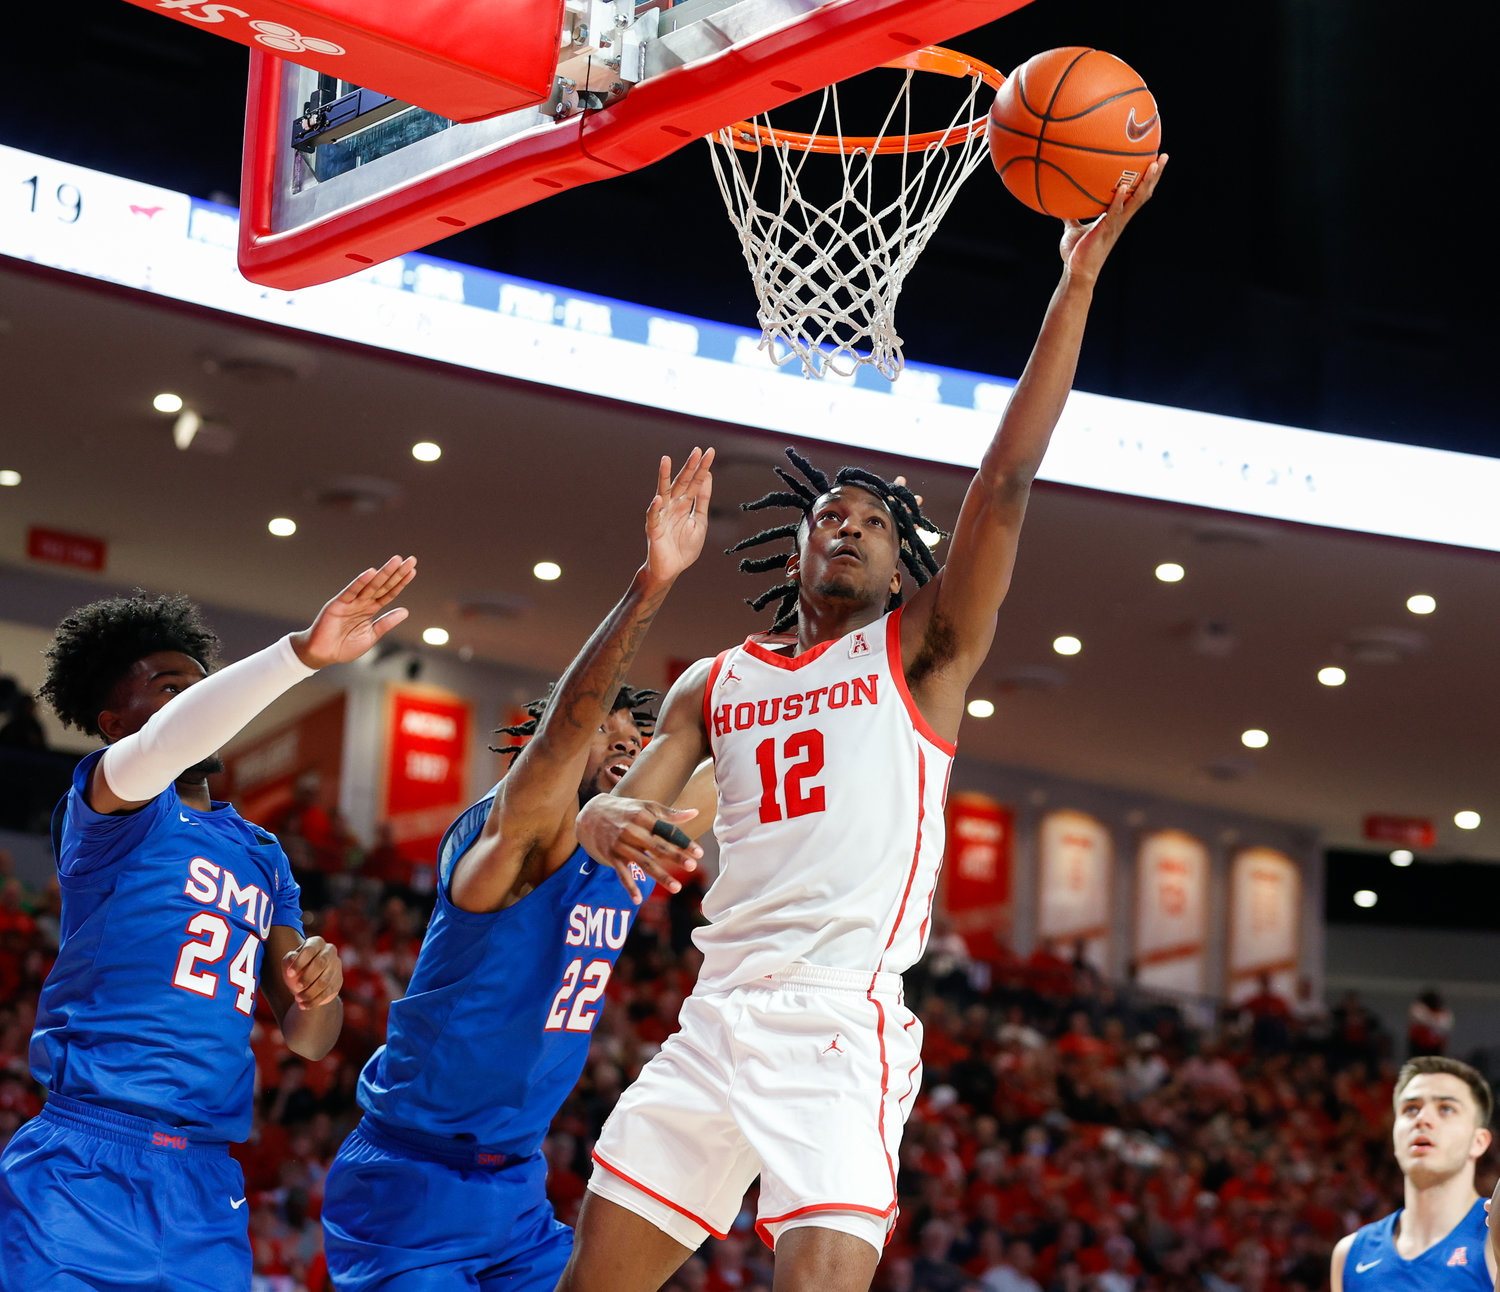 Houston guard Tramon Mark (12) goes to the basket during an NCAA men’s basketball game between the Houston Cougars and the Southern Methodist Mustangs on Jan. 5, 2023 in Houston. Houston won, 87-53,